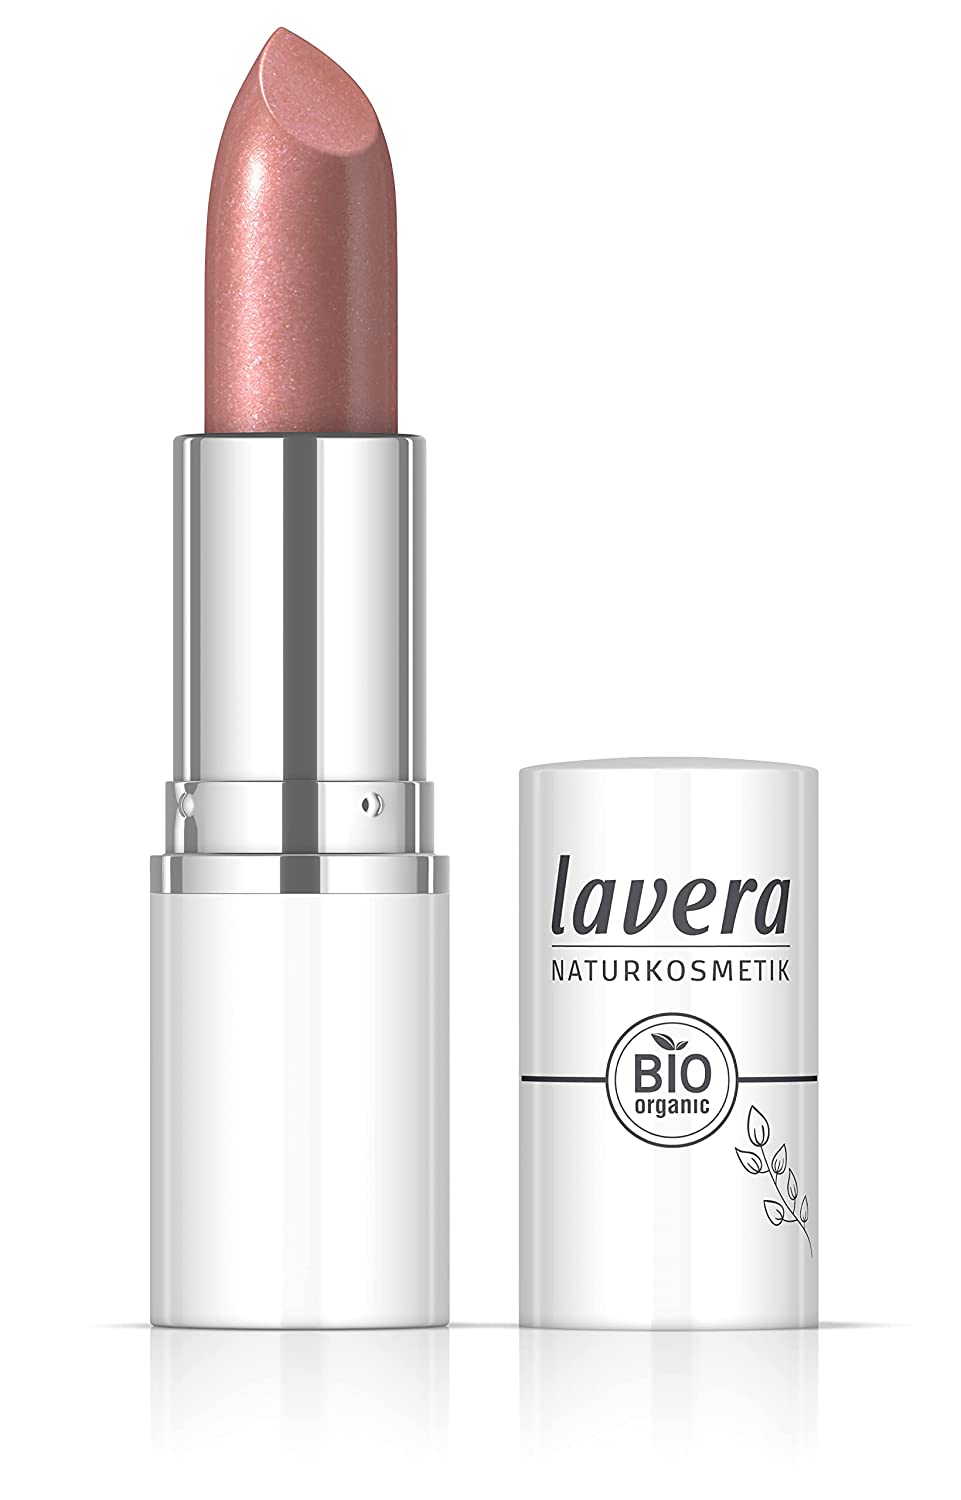 Lavera Candy Quartz Lipstick - Rosewater 01 - Intensive Glow - Feather -Light Texture - Up to 6 Hours Hold - Vegan - Natural Cosmetics (1 x 18 G)